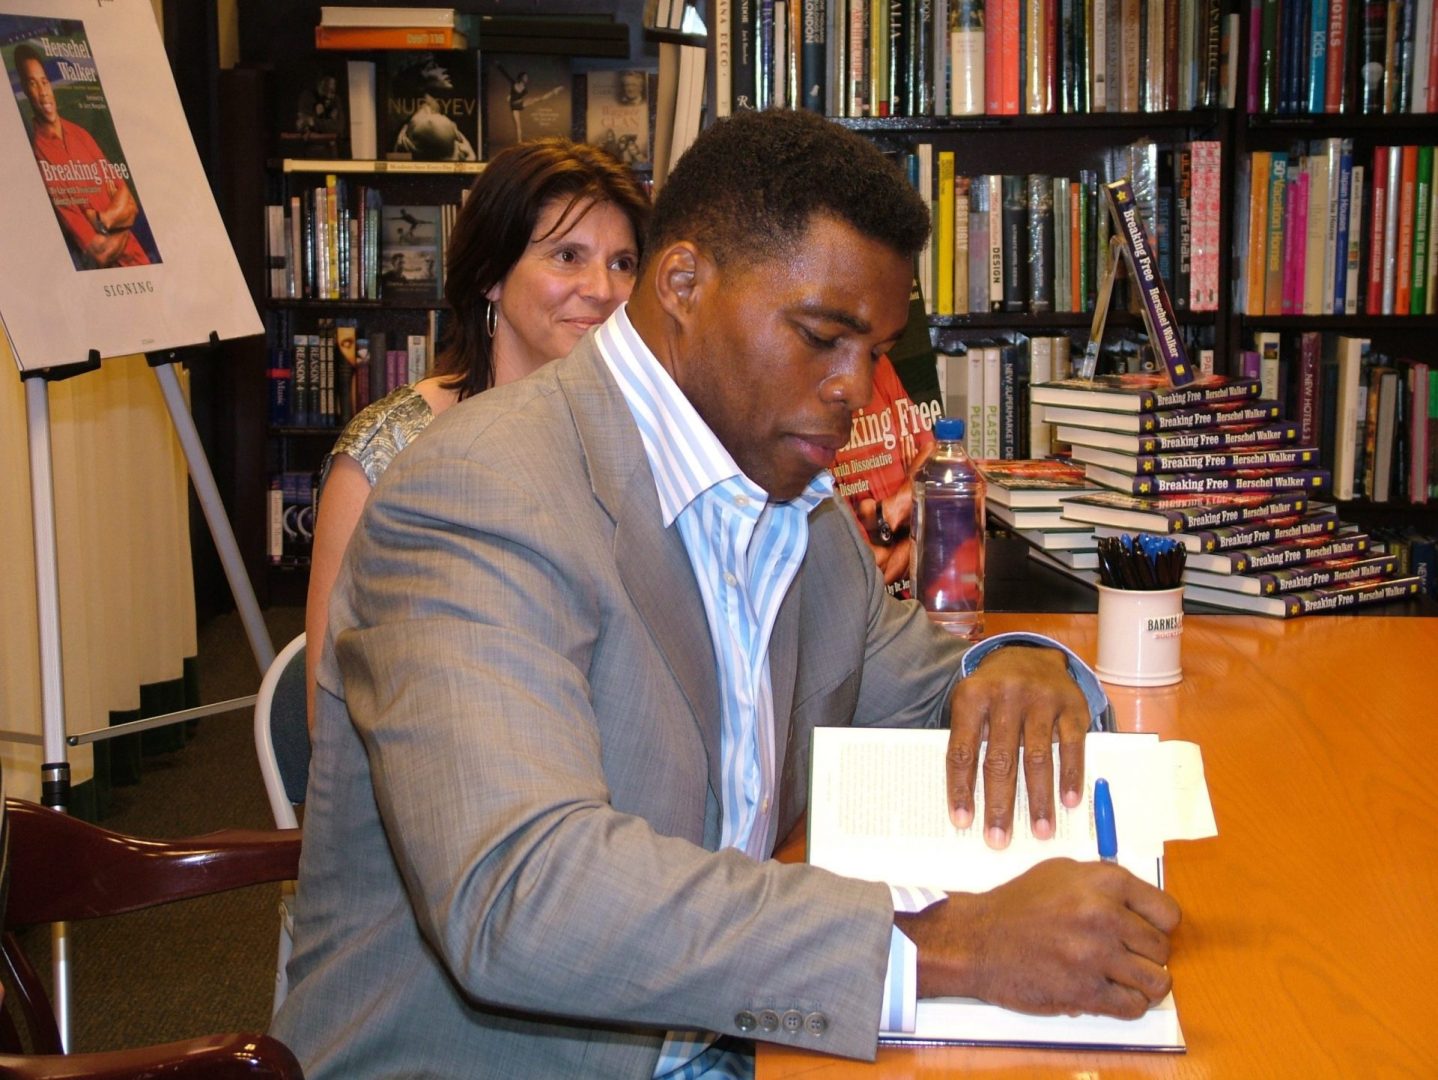 Herschel Walker is focused on the wrong thing ahead of runoff election